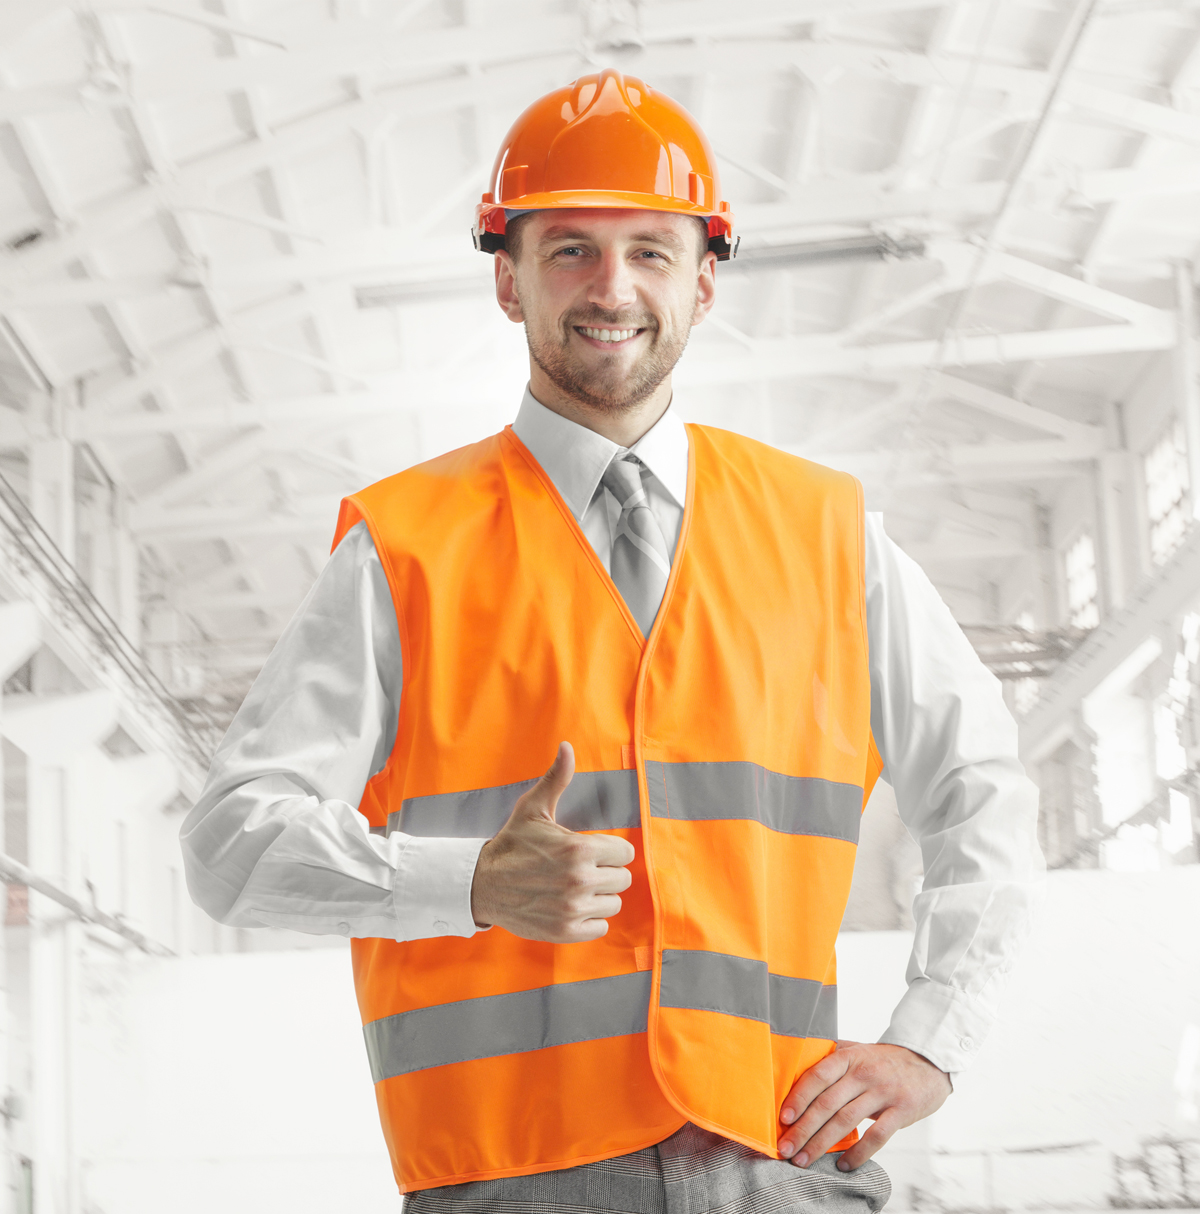 The builder in a construction vest and orange helmet smiling with sign ok against industrial background. Safety specialist, engineer, industry, architecture, manager, occupation, businessman, job concept